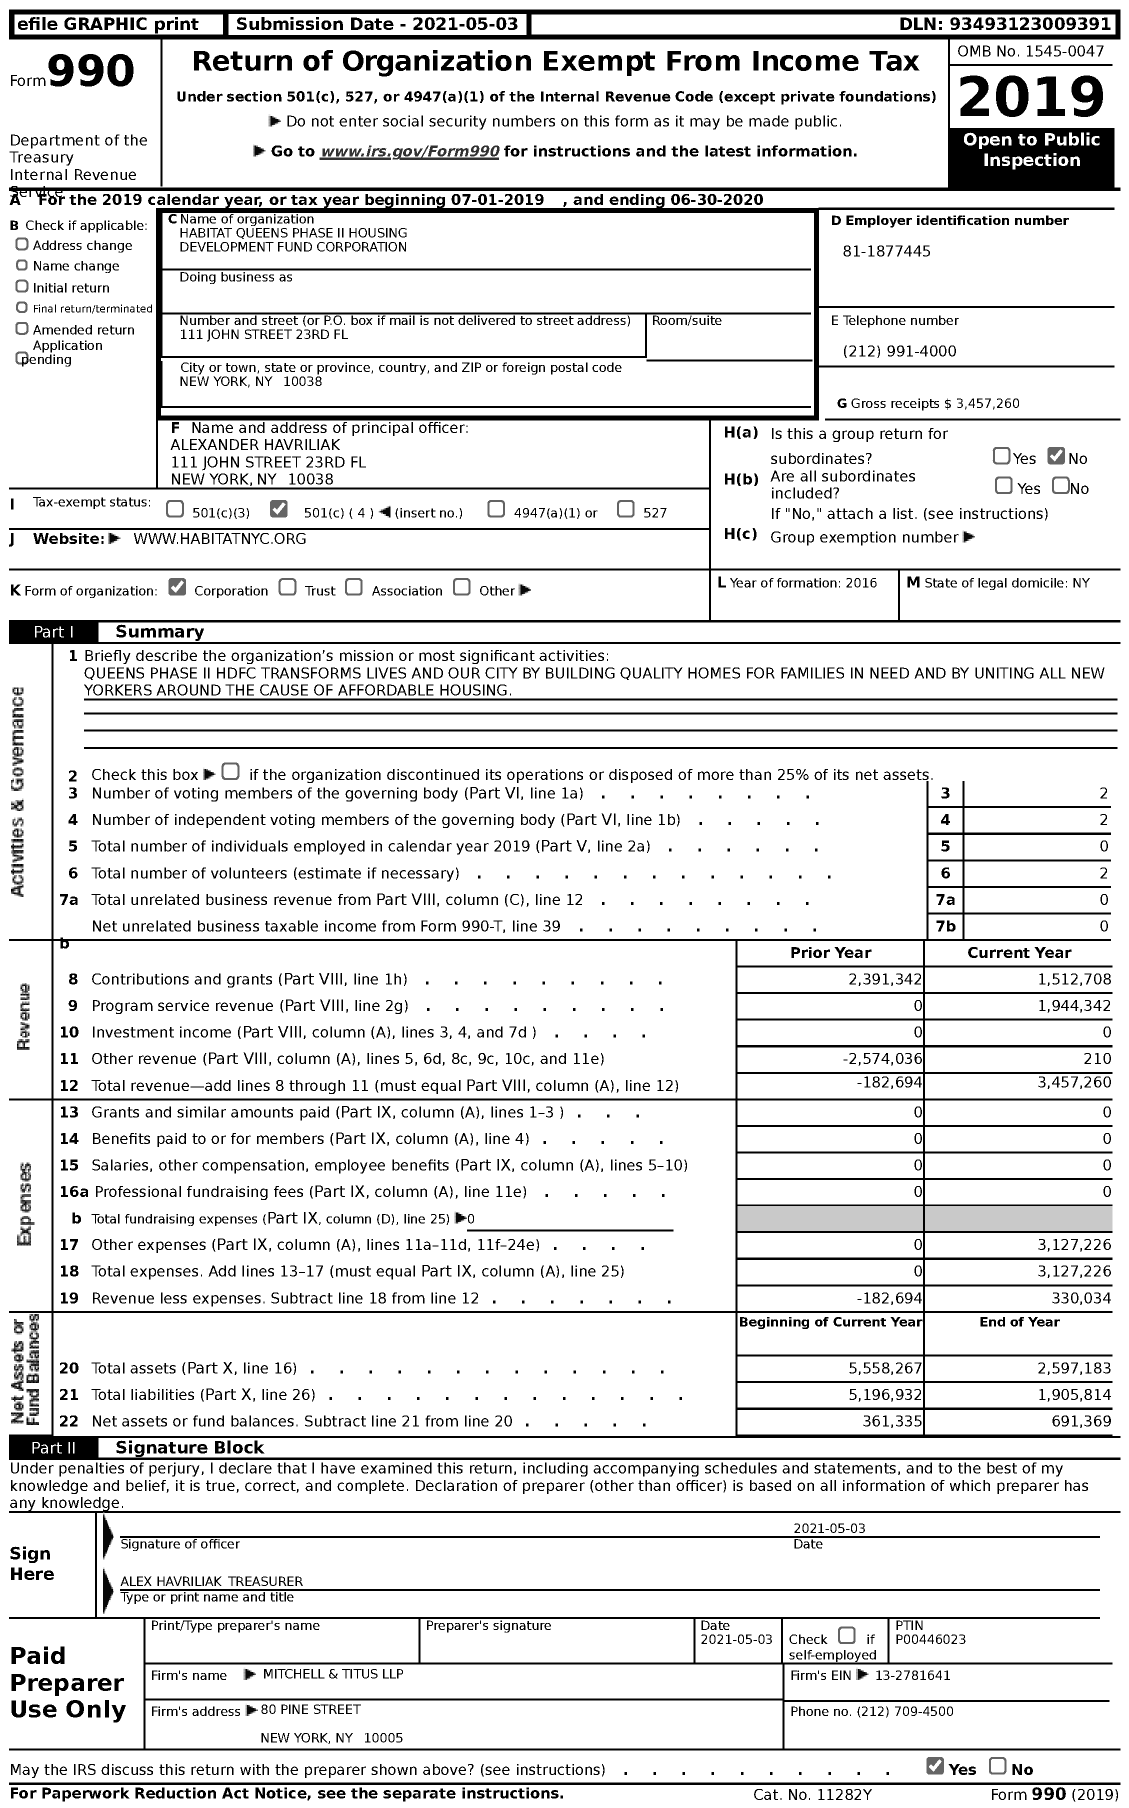 Image of first page of 2019 Form 990 for Habitat Queens Phase Ii Housing Development Fund Corporation